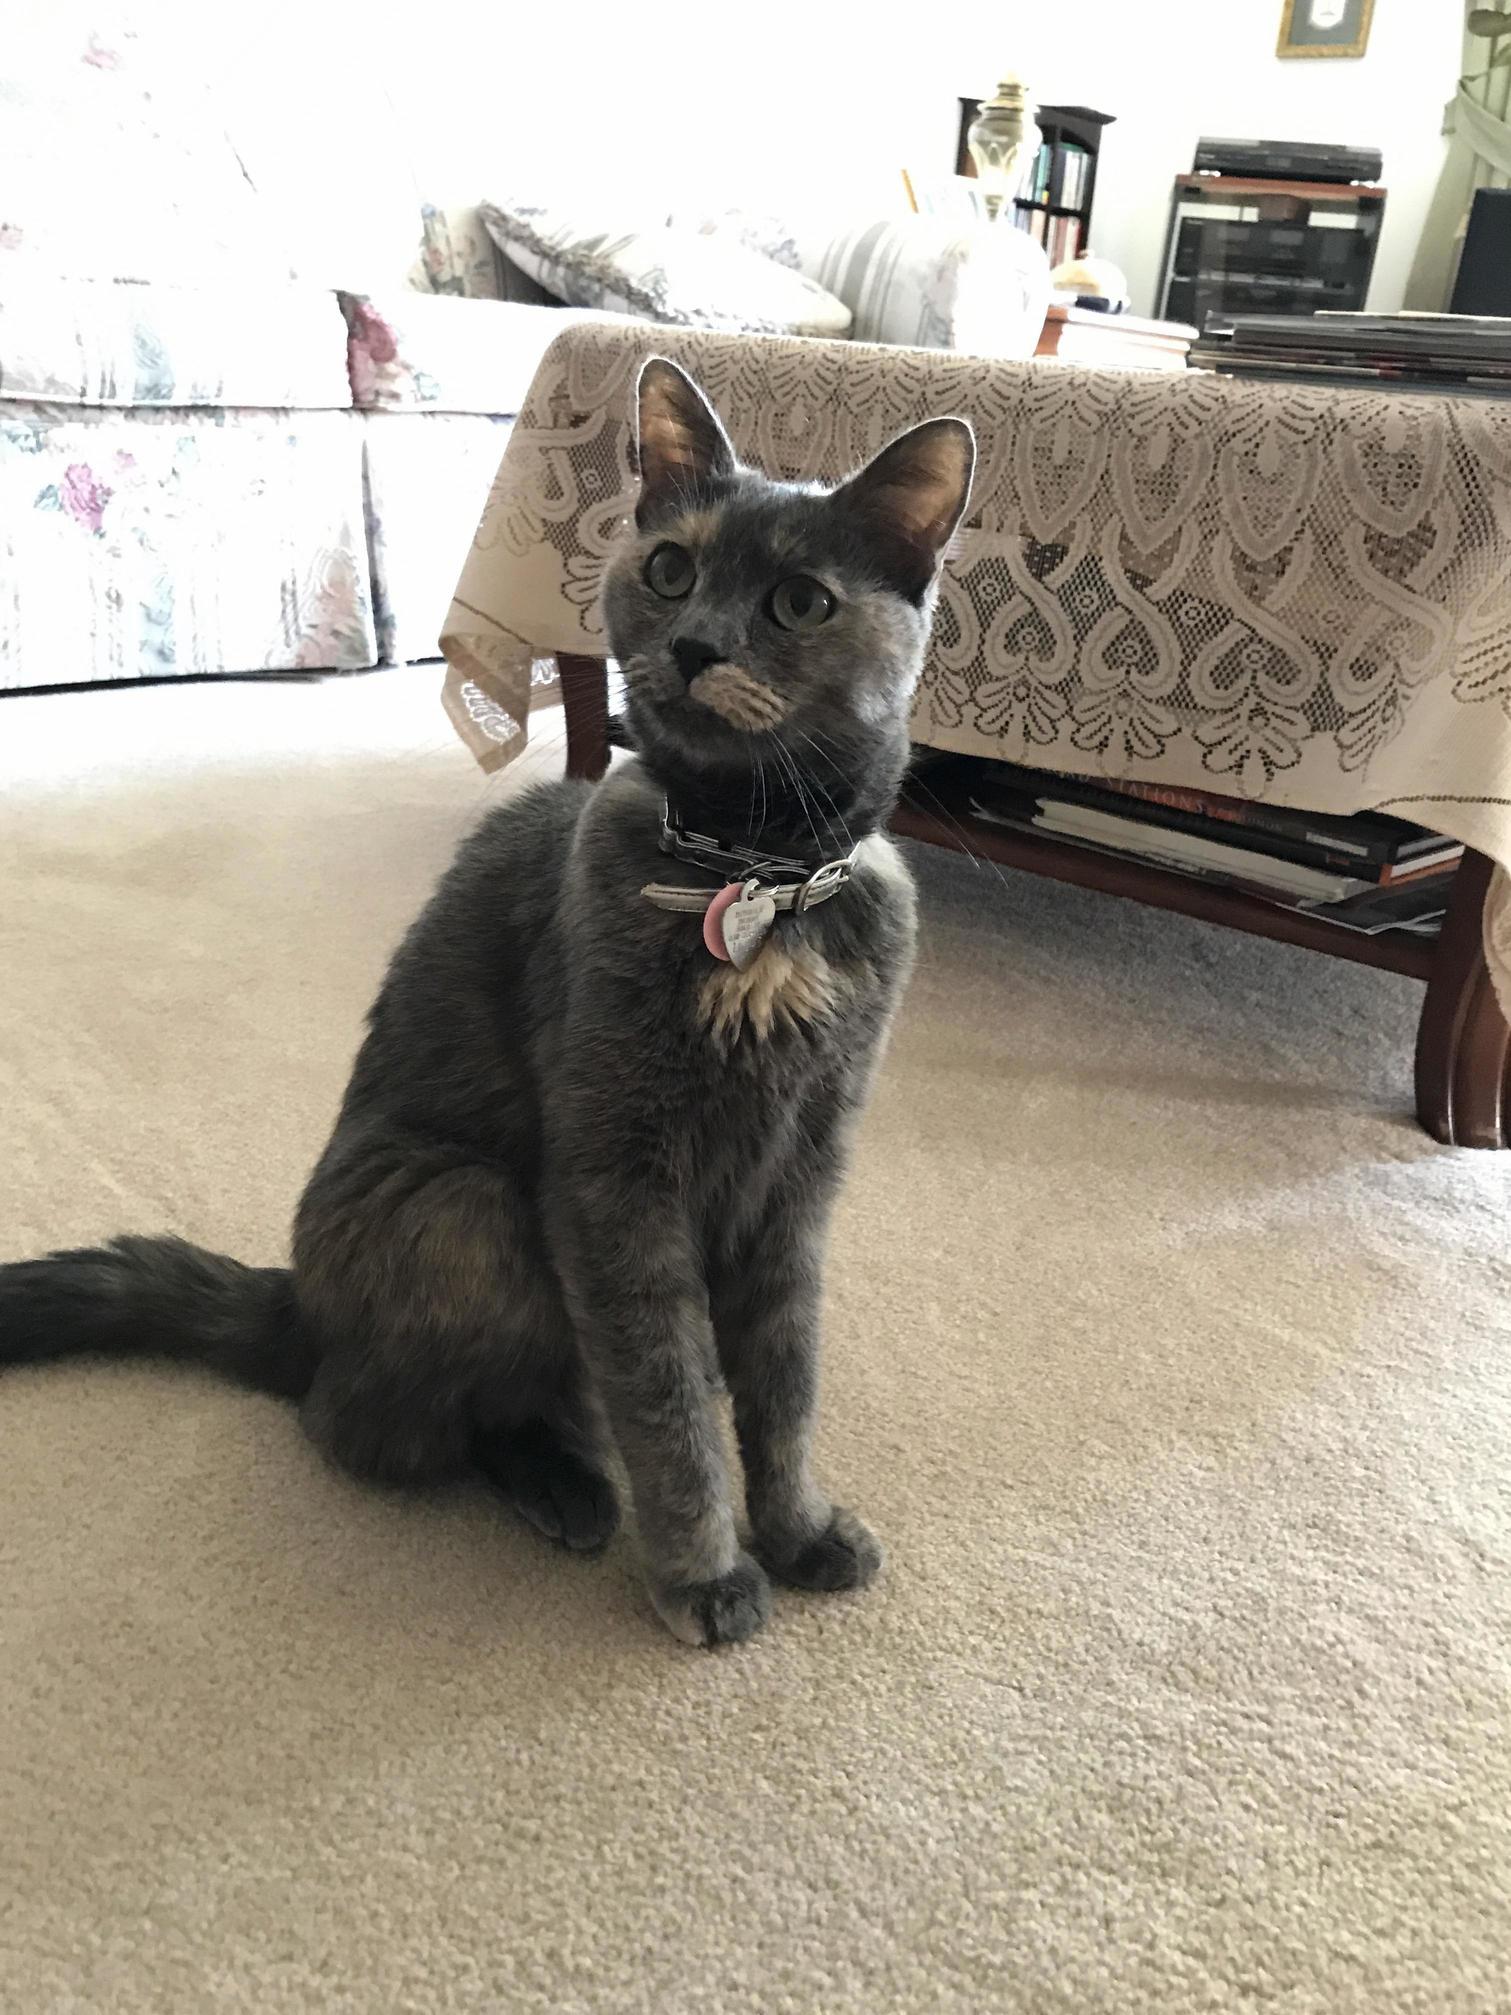 Meet curry! this 3 year old beauty was rescued from a small hoarding situation where she lived with seven savannah cats. now, she has an entire home to herself and a forever family who loves her!